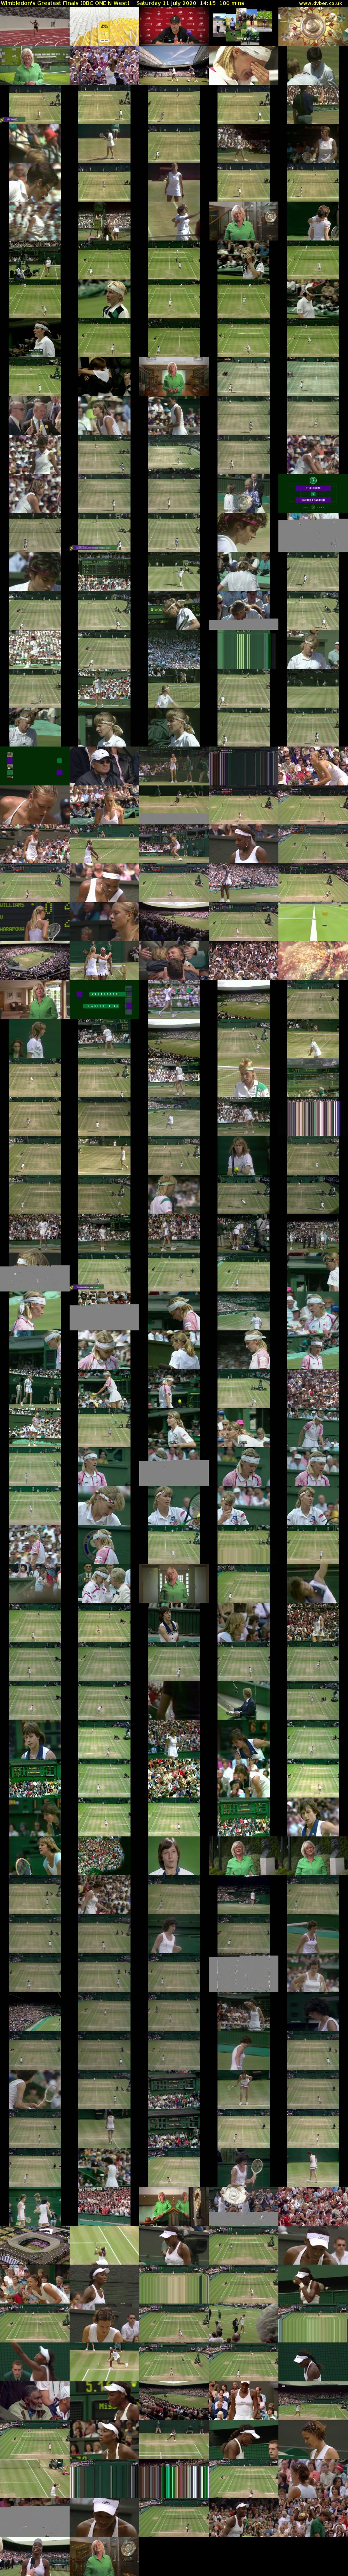 Wimbledon's Greatest Finals (BBC ONE N West) Saturday 11 July 2020 14:15 - 17:15